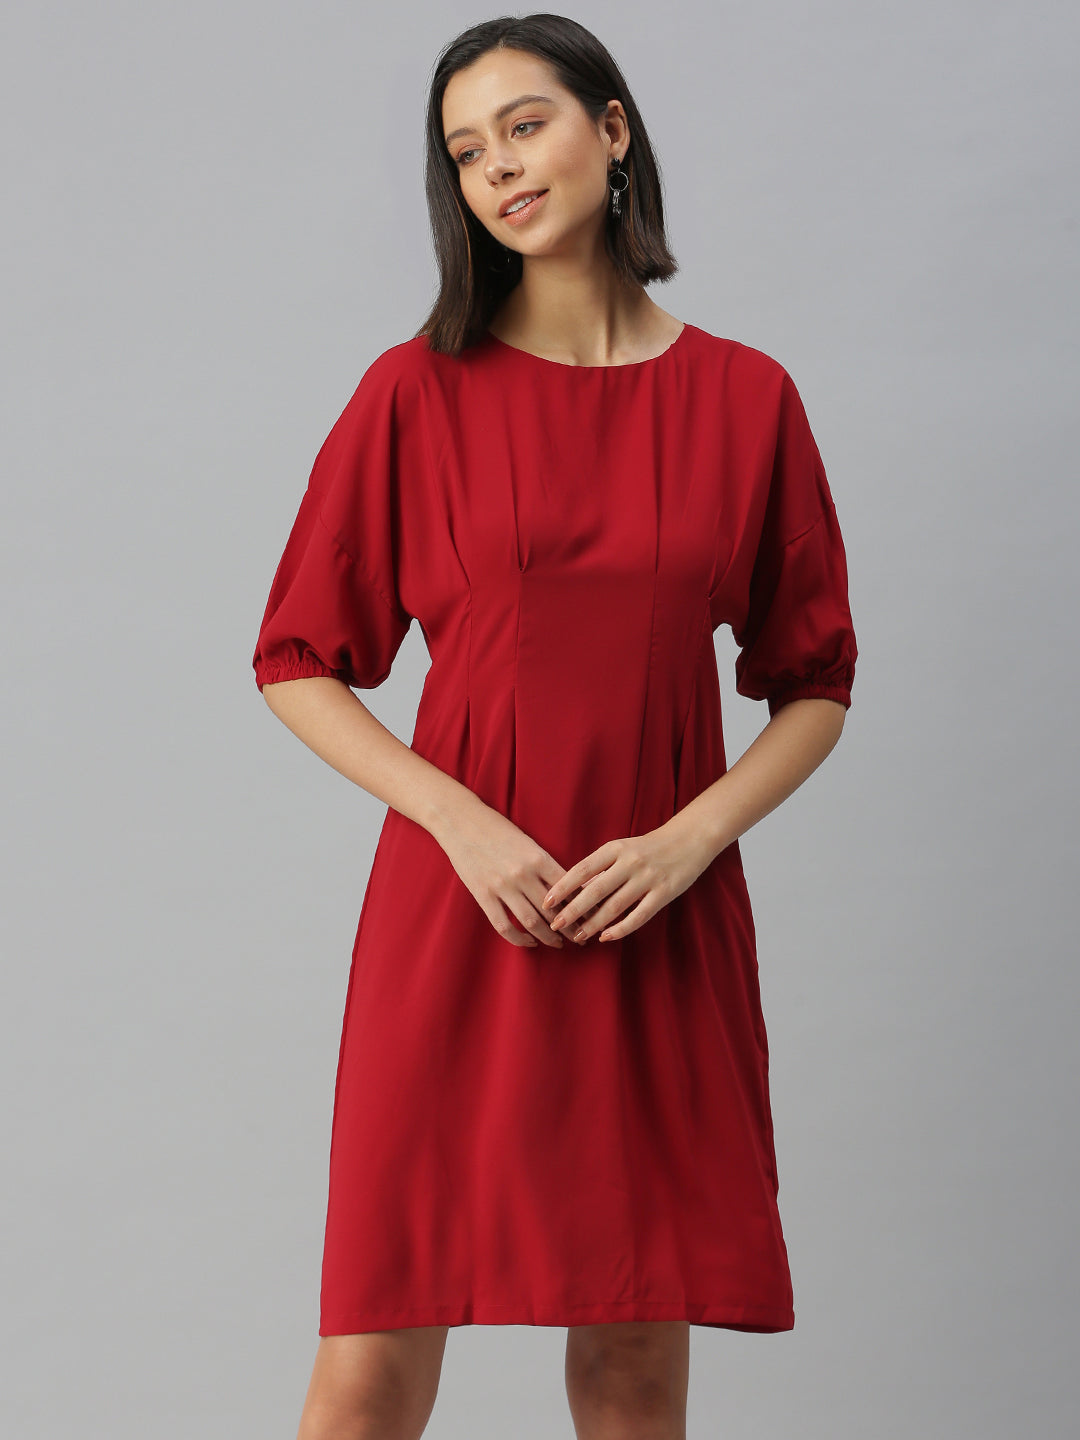 Women Solid A-Line Red Dress